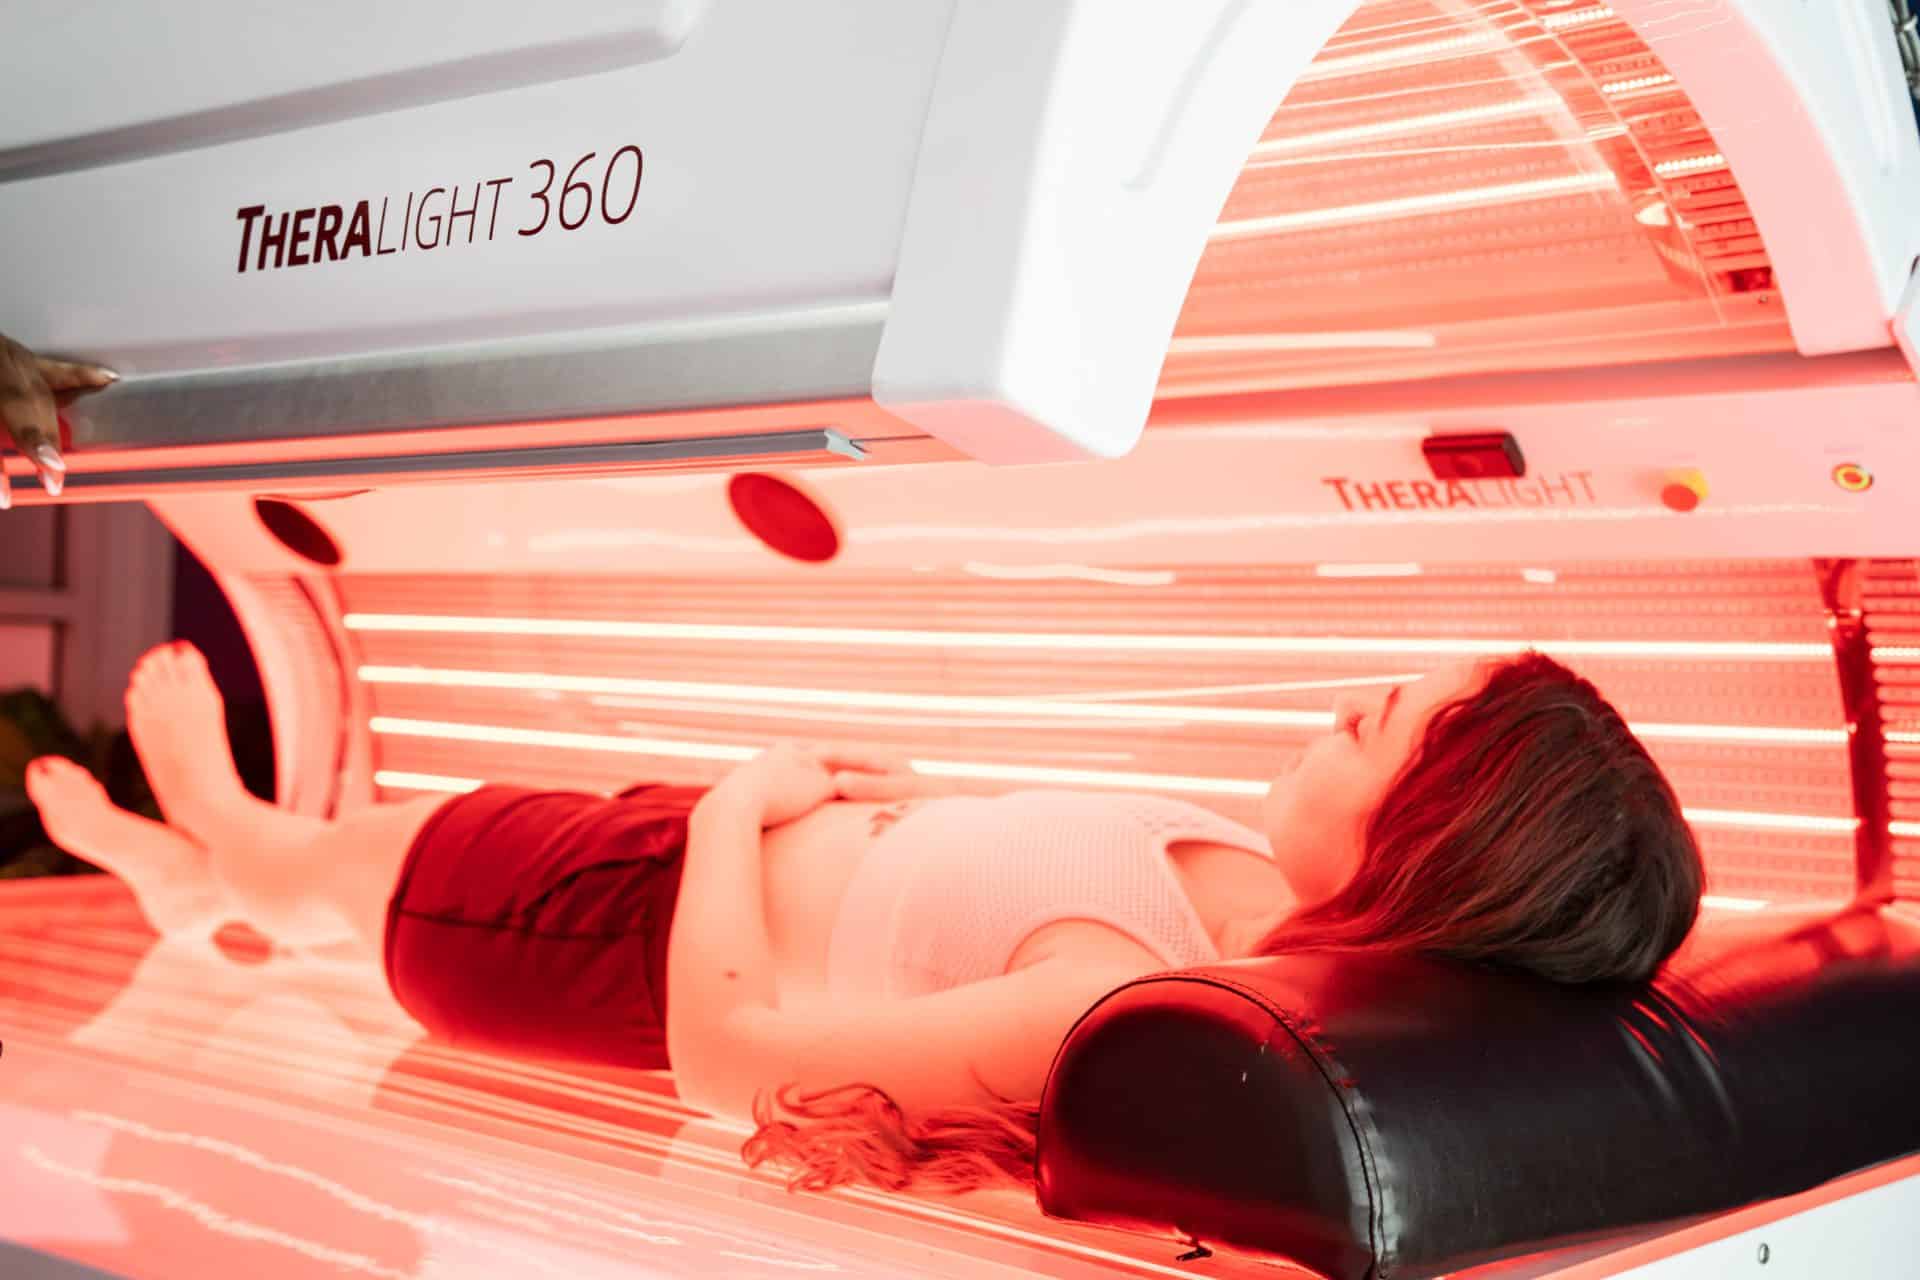 Red Light Therapy For Inflammation & Pain